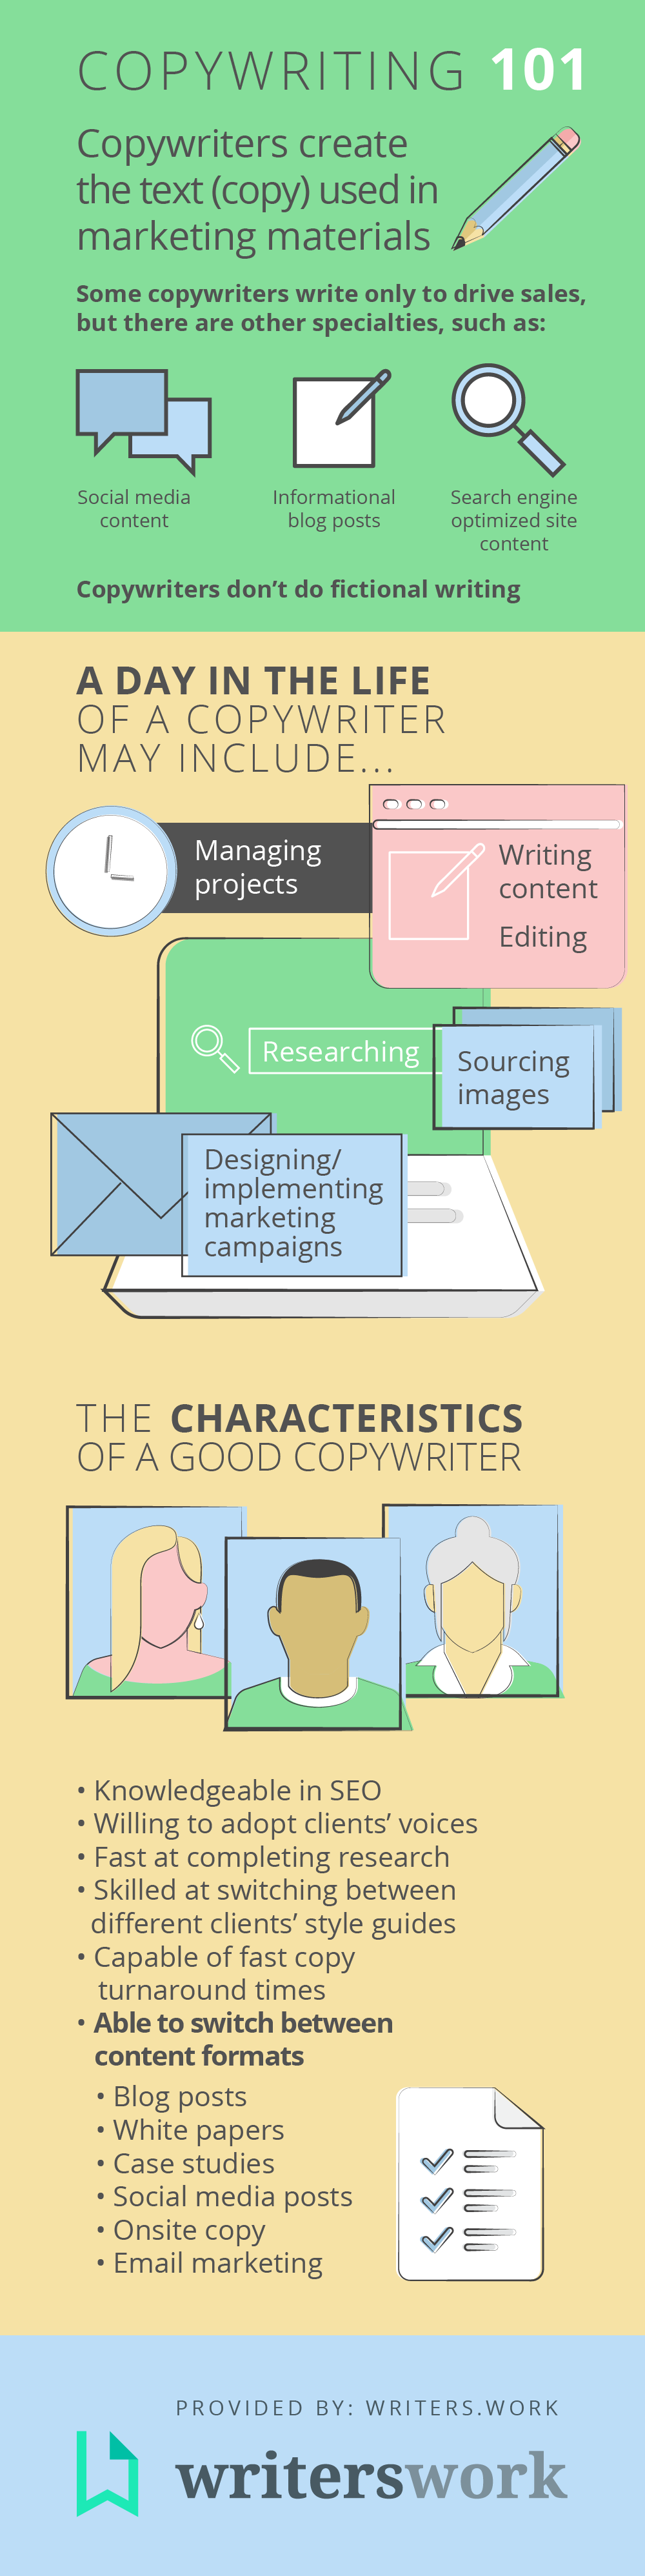 Infographic decribing the daily life of a freelance copywriter.